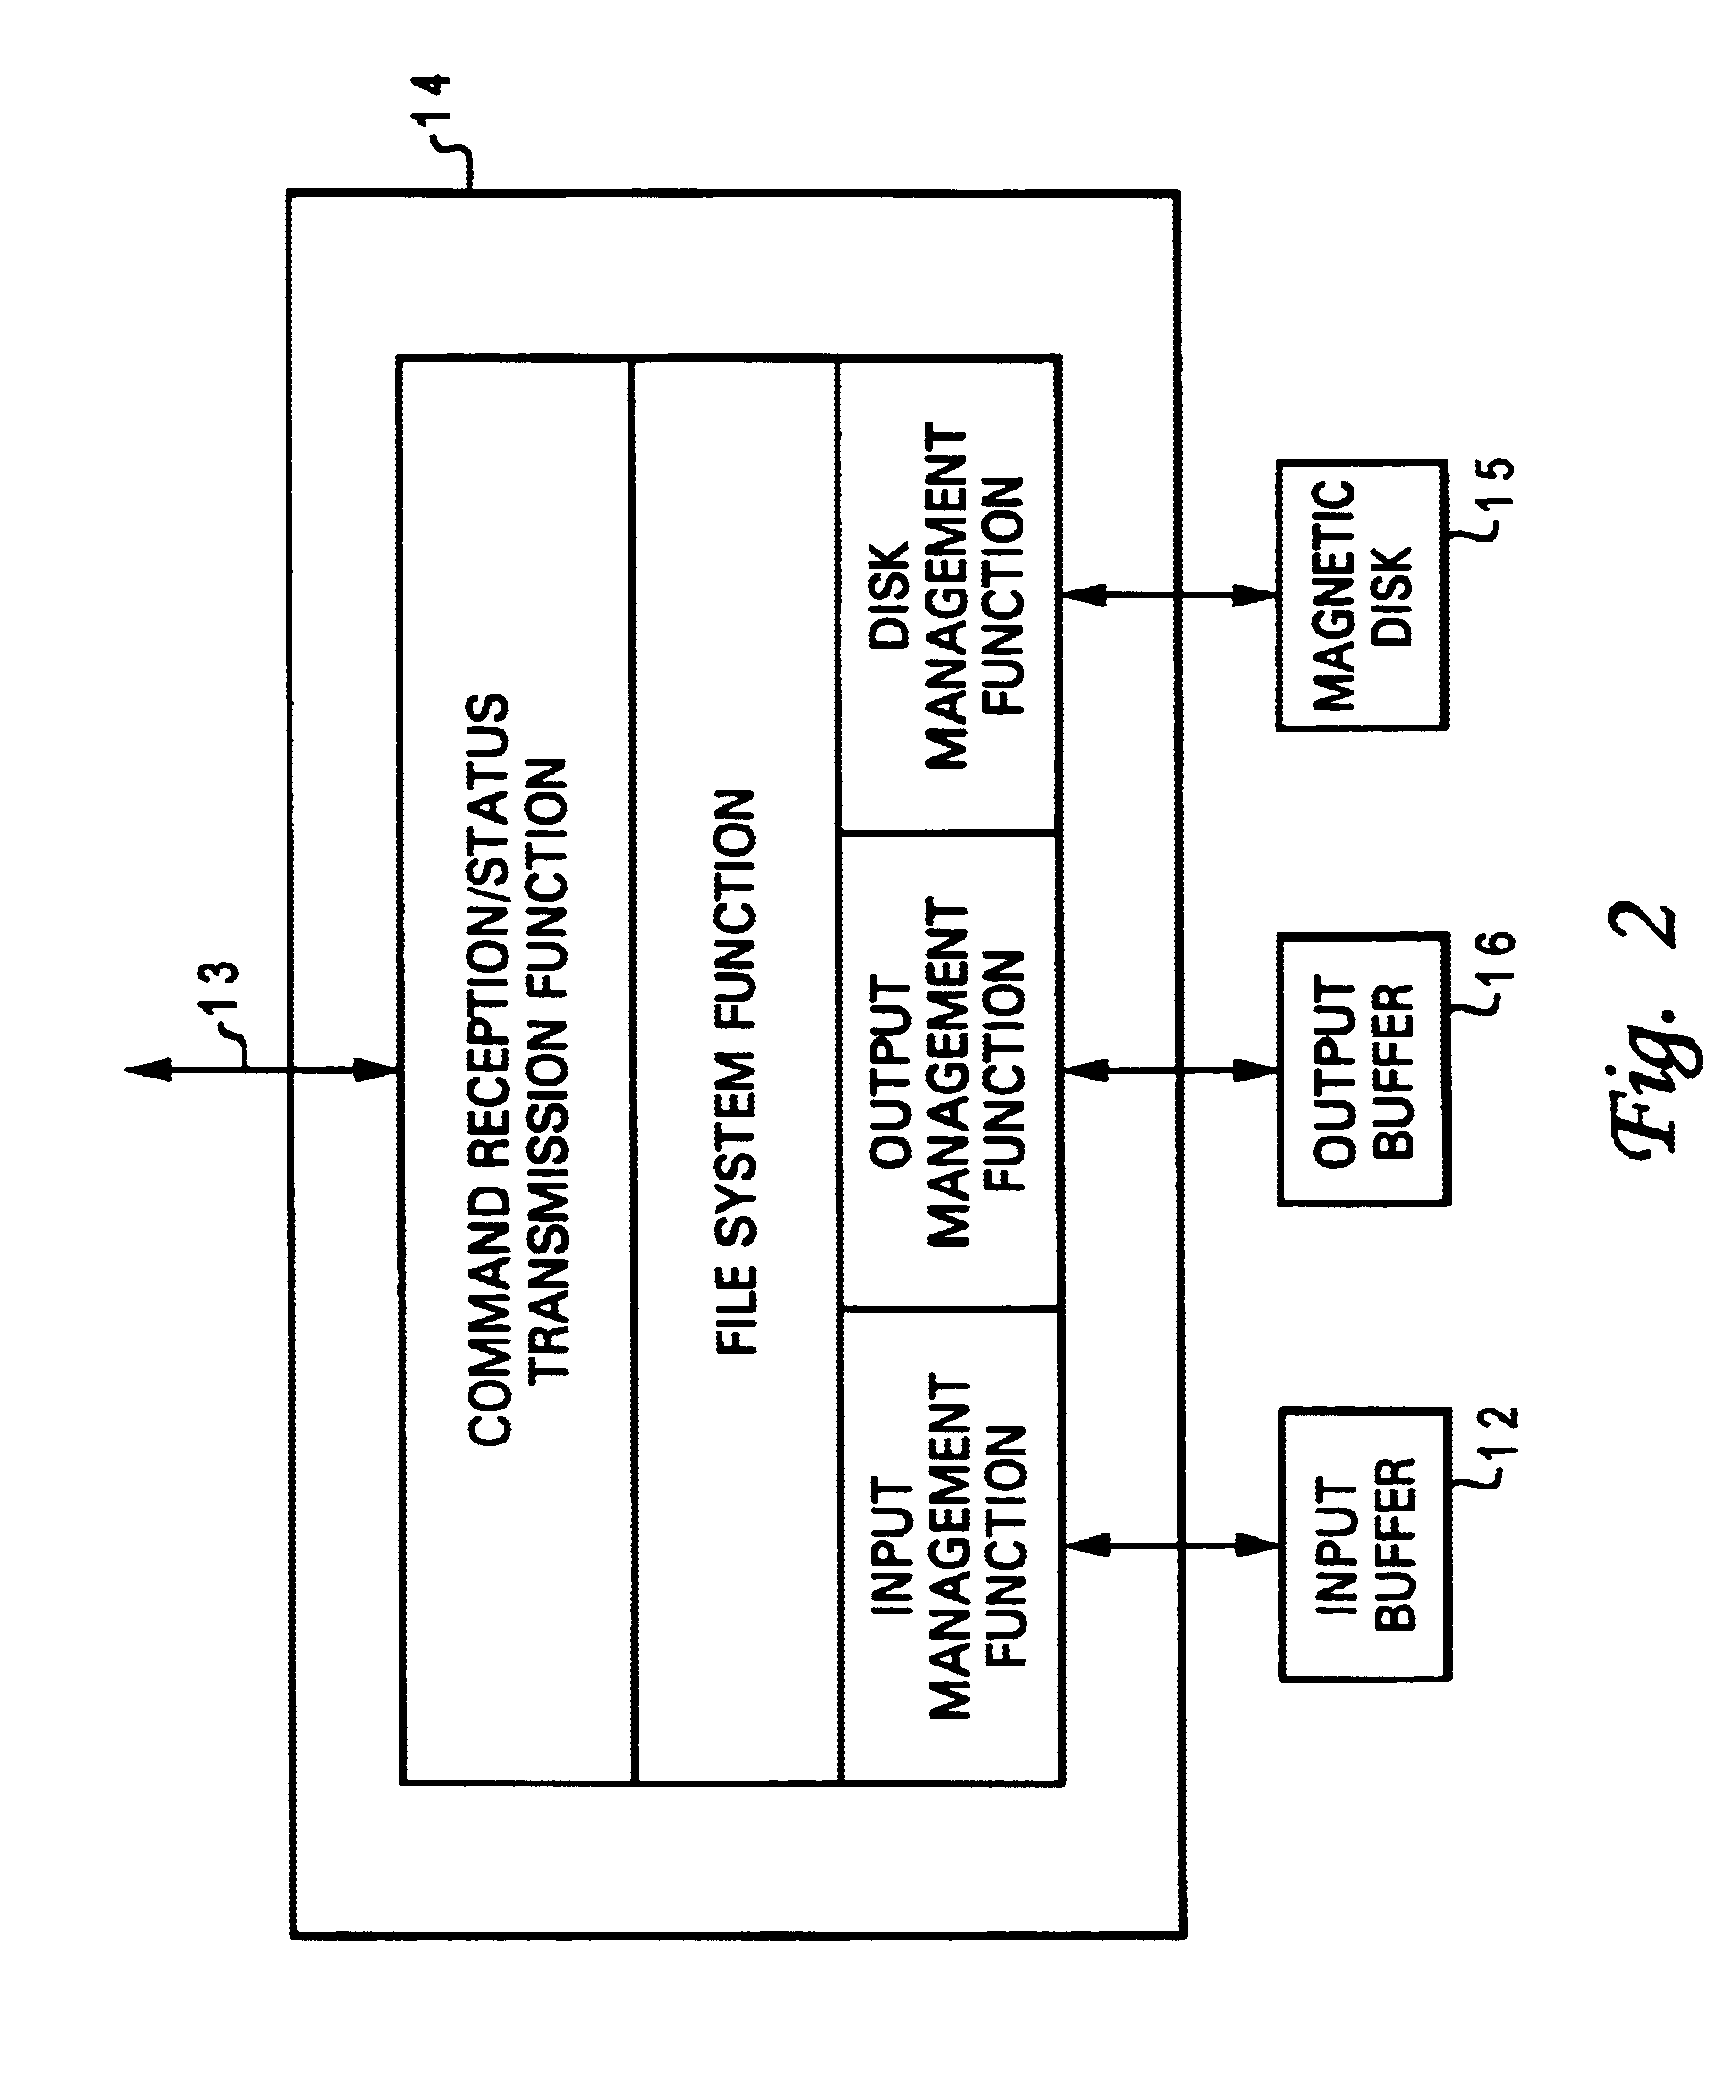 Data recording and reproducing apparatus, method for recording and reproducing video data, disk drive unit, and control unit of data recording and reproducing apparatus